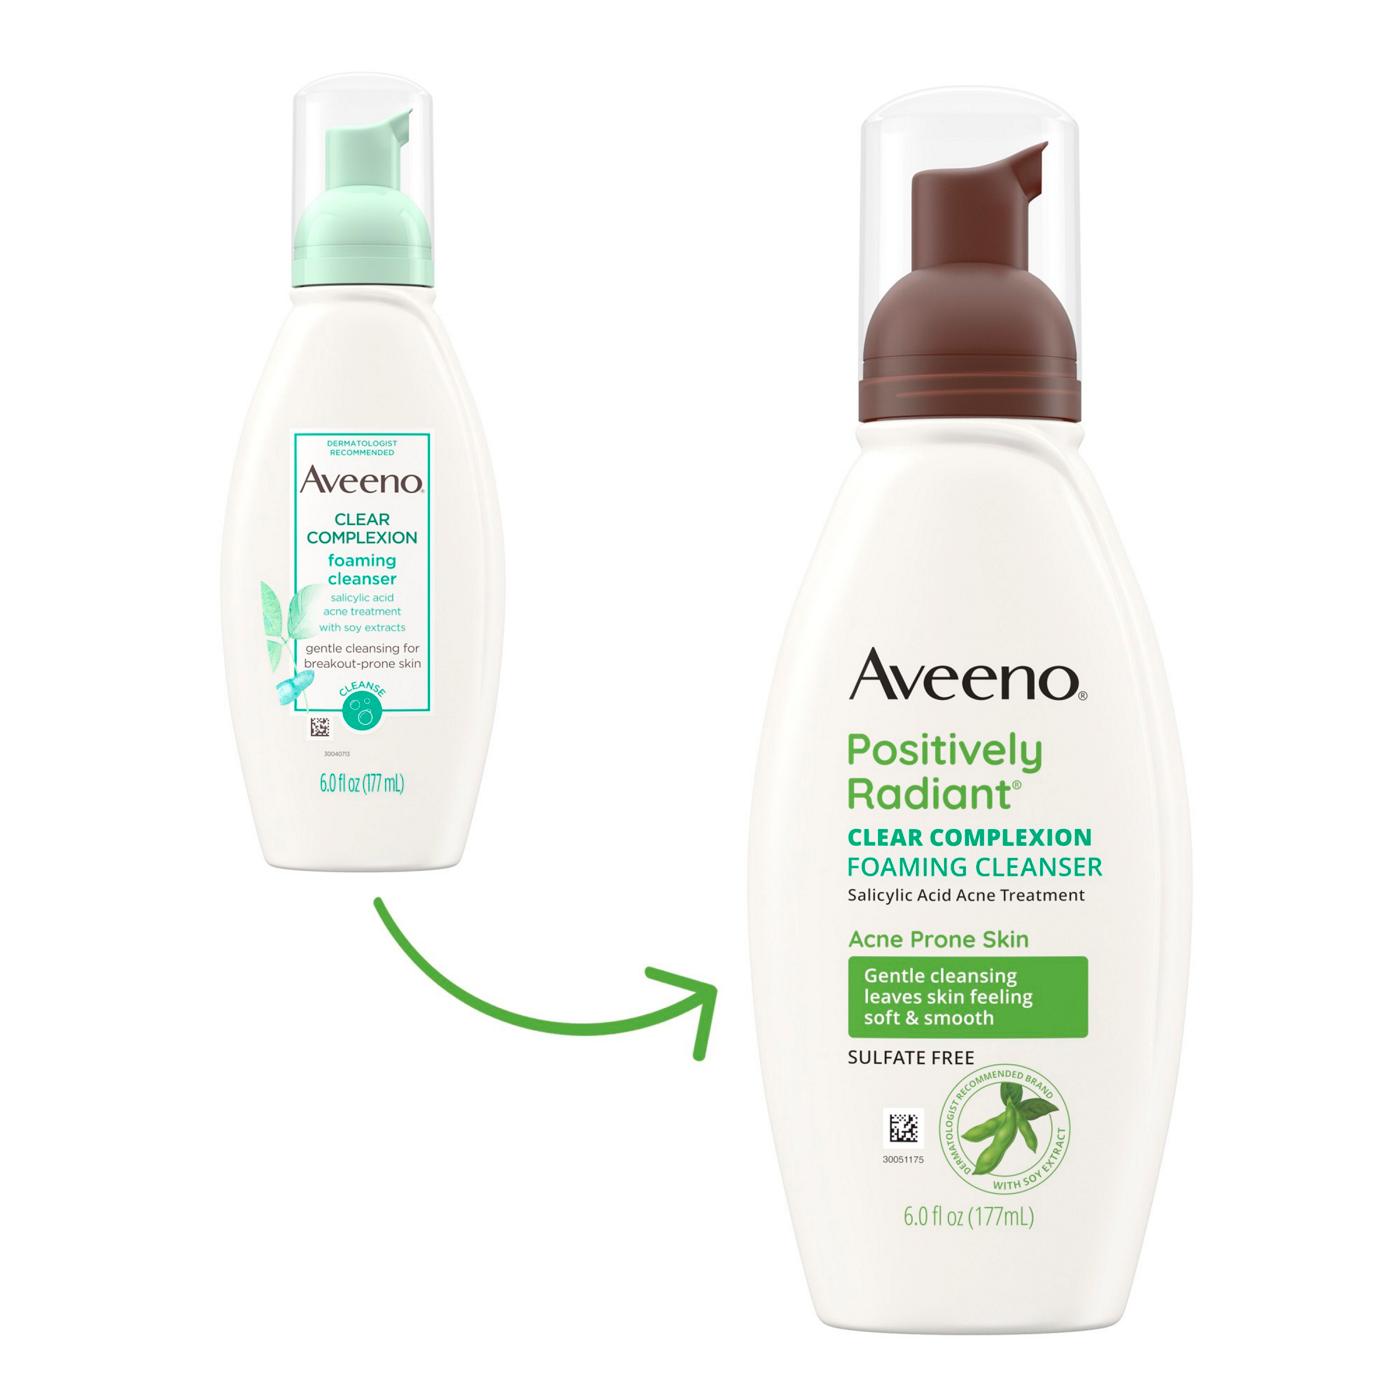 Aveeno Positively Radiant Clear Complexion Foaming Cleanser; image 5 of 6